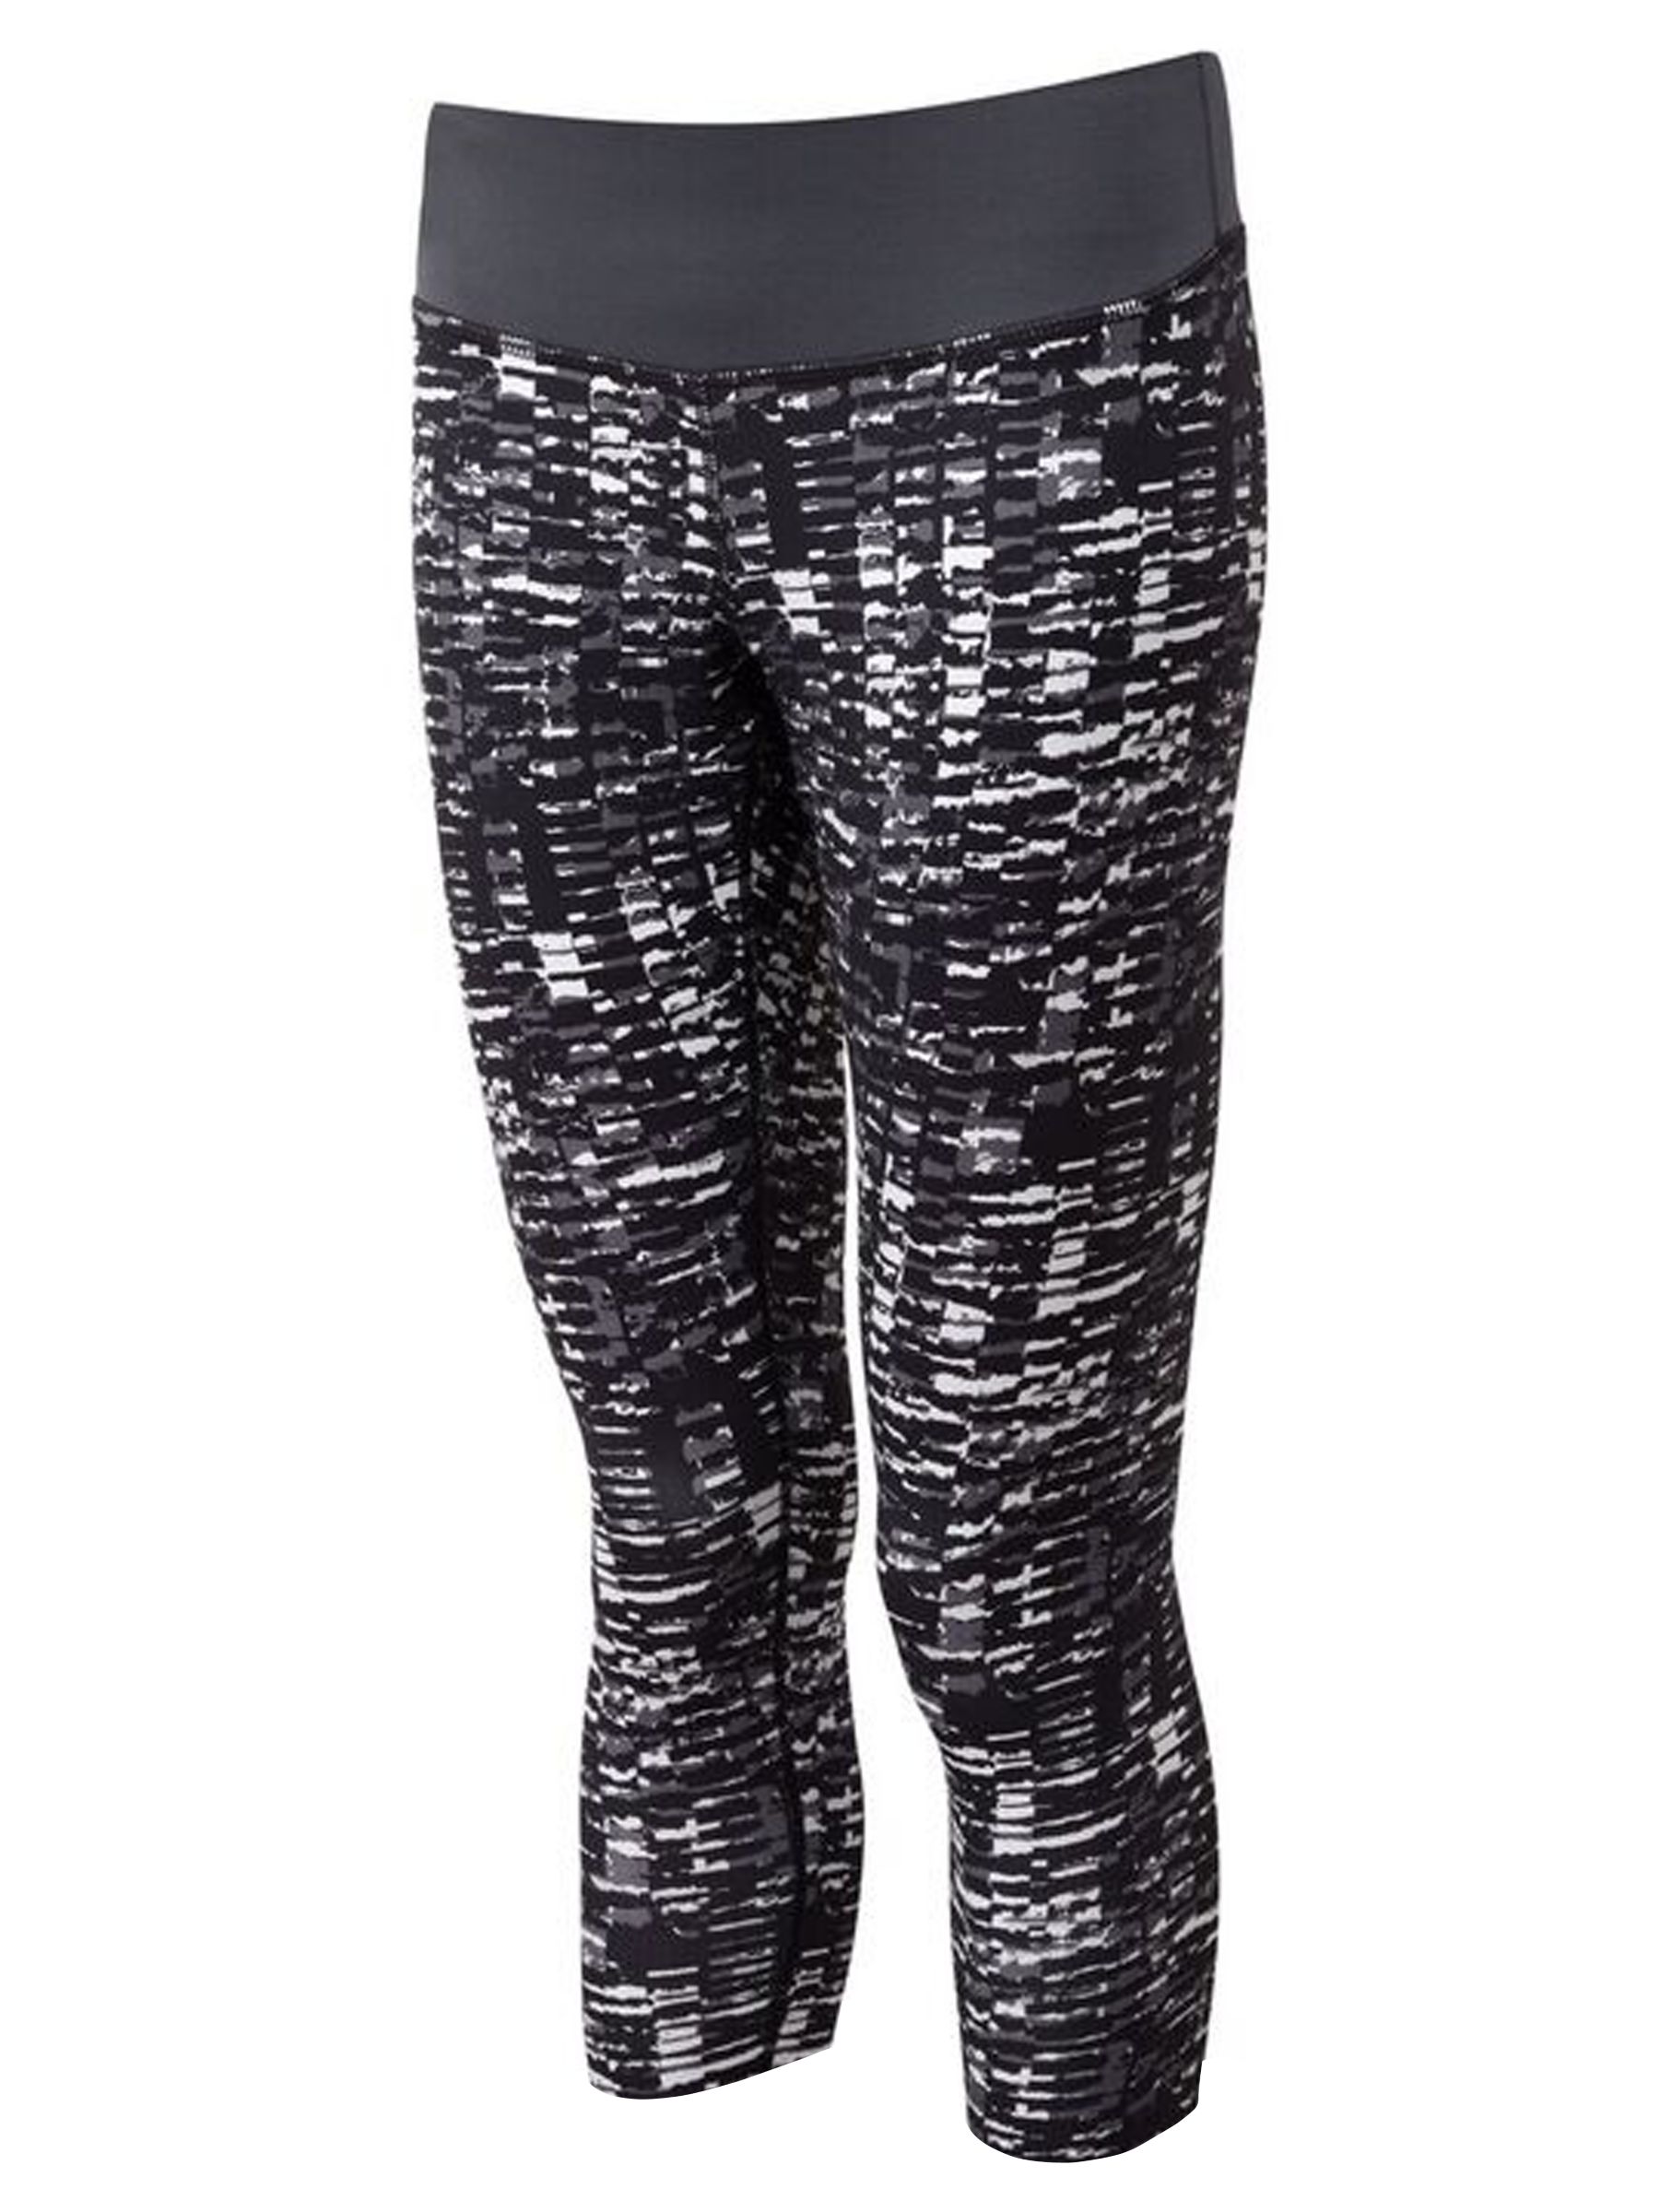 Ronhill Momentum Cropped Running Tights, Grey Sponge, 8